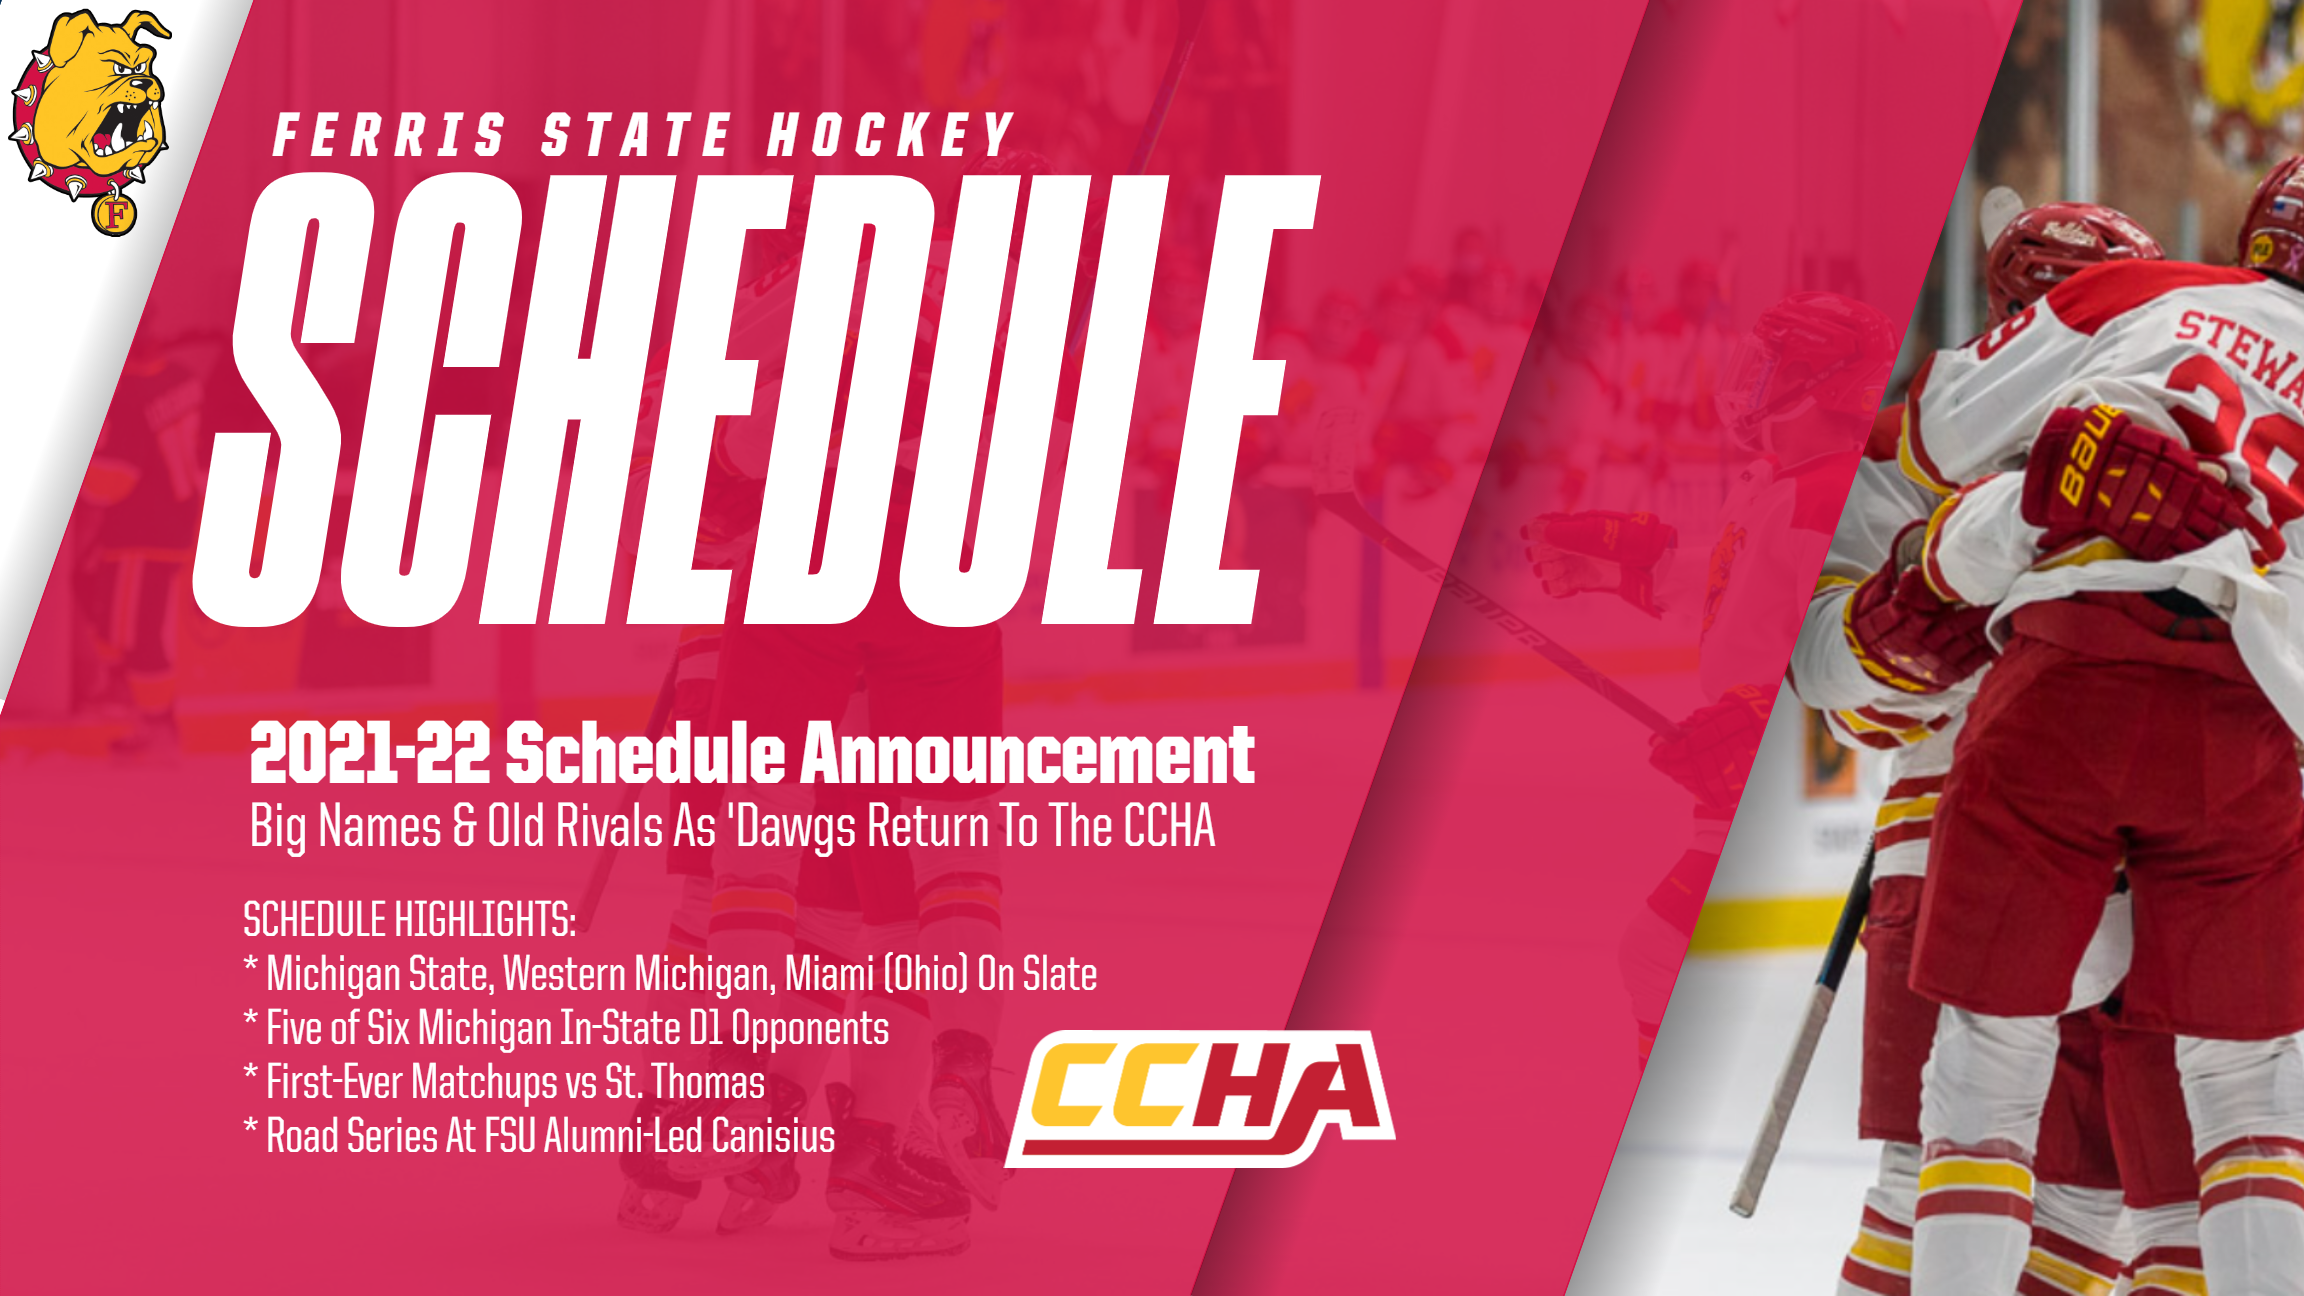 Old Rivals And Big Names Highlight Ferris State's 2021-22 Return To The CCHA